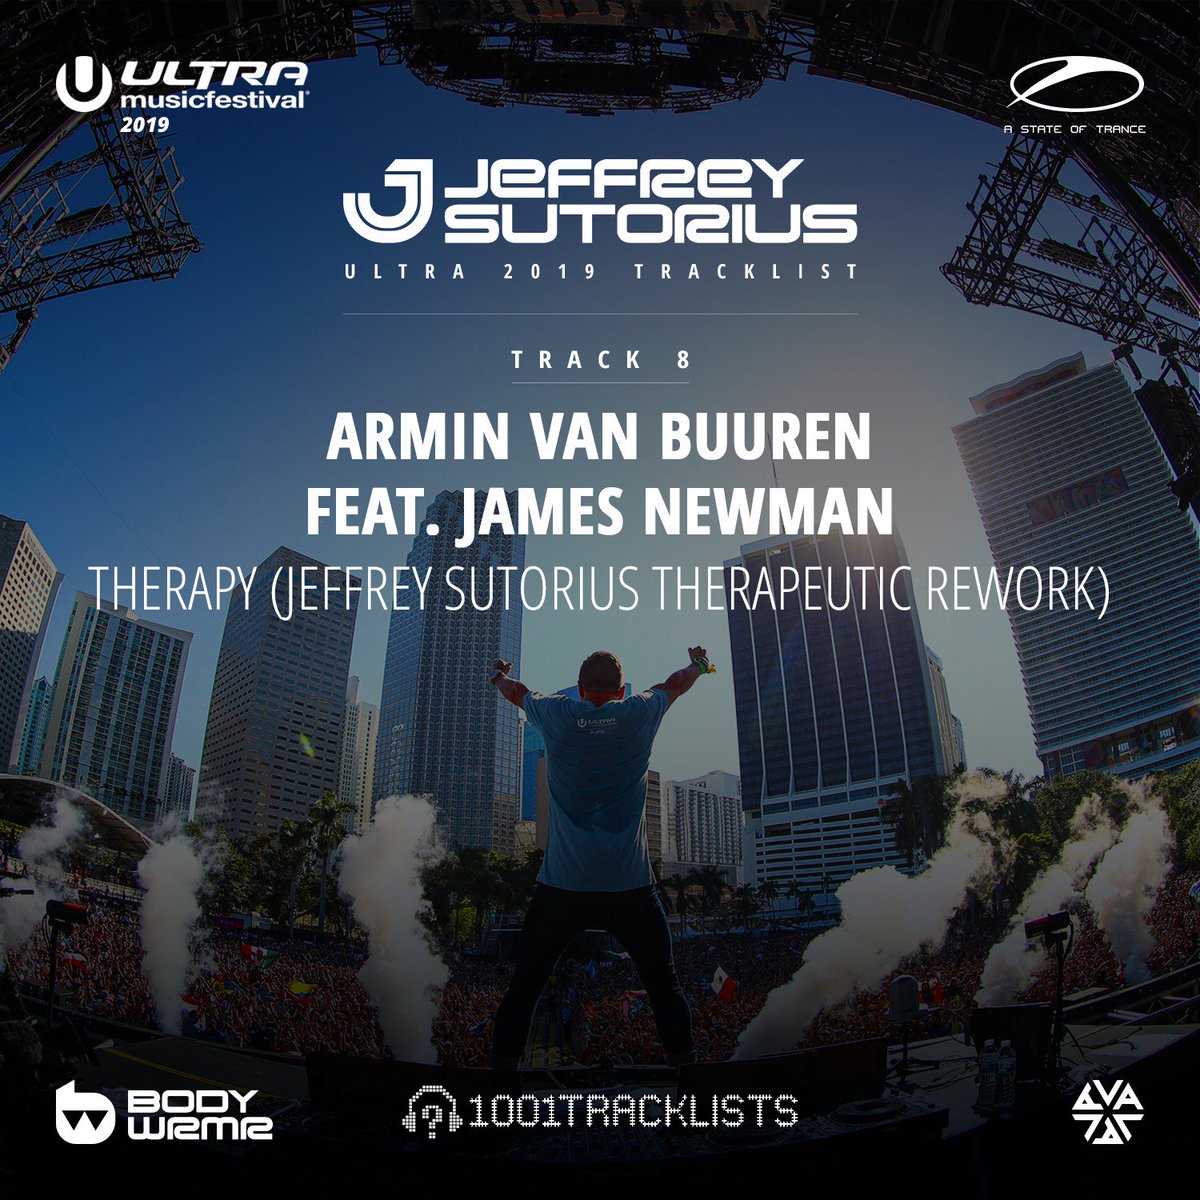 Jeffrey Sutorius Official On Twitter 08 Armin Van Buuren Feat James Newman Therapy Jeffrey Sutorius Therapeutic Rework Arminvanbuuren Jamesnewmanuk Ultra Asot 1001tracklists Bodywrmr Visualartform Jeffreysutorius Spreadlove Armin van buuren (born armin jozef jacobus daniel van buuren, december 25, 1976) is a trance (mostly progressive trance and uplifting trance) music producer and dj from the netherlands. twitter